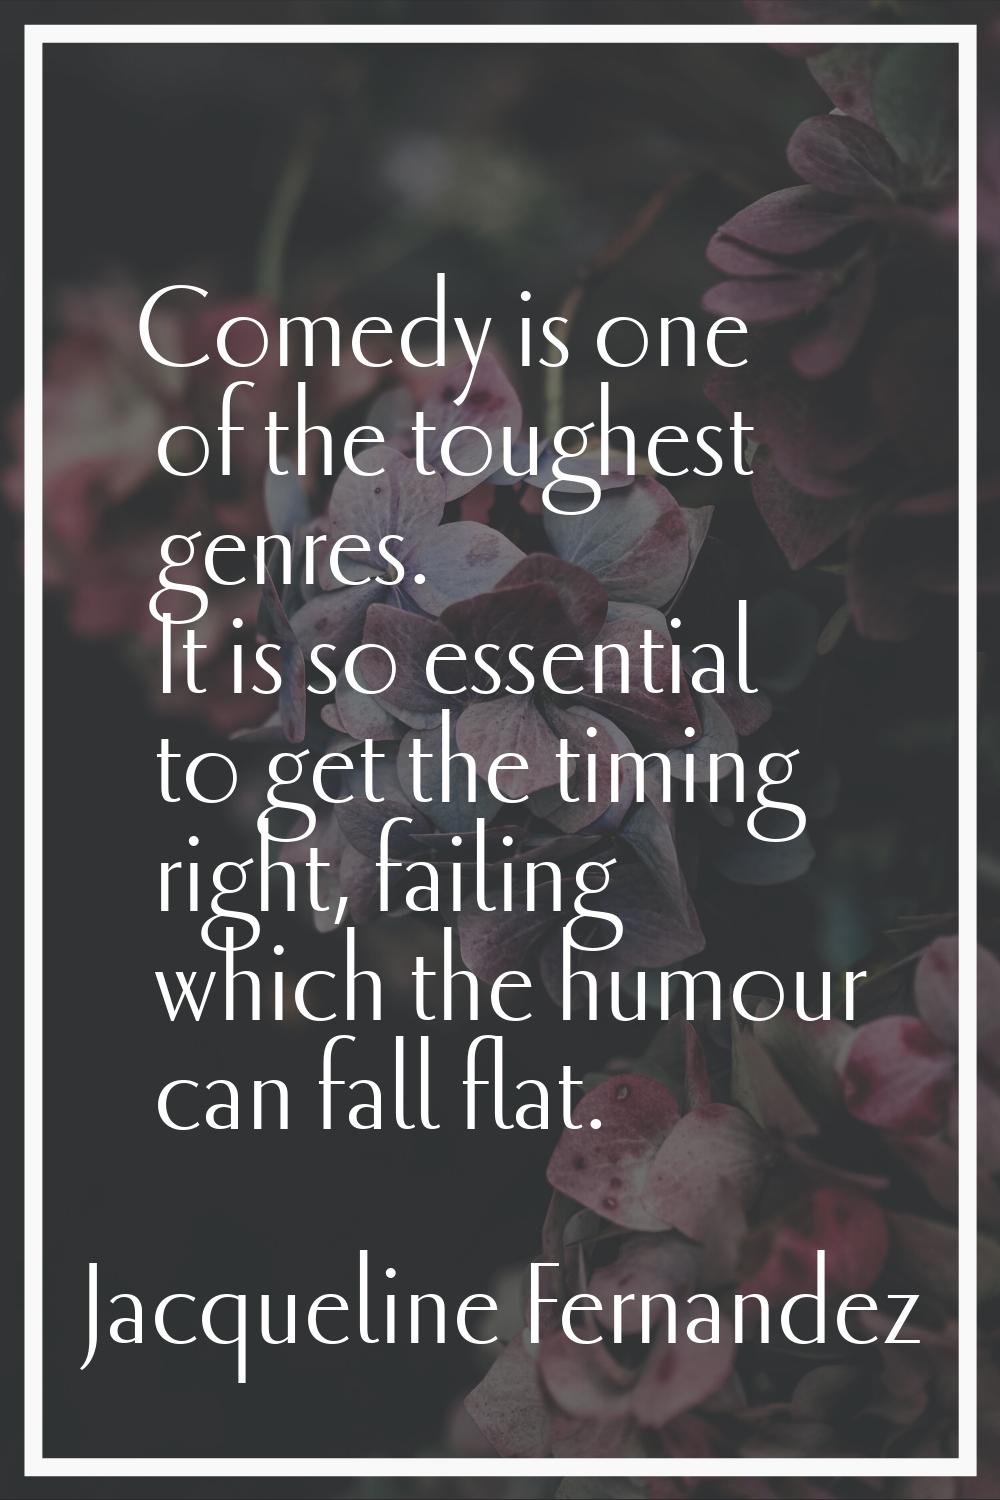 Comedy is one of the toughest genres. It is so essential to get the timing right, failing which the